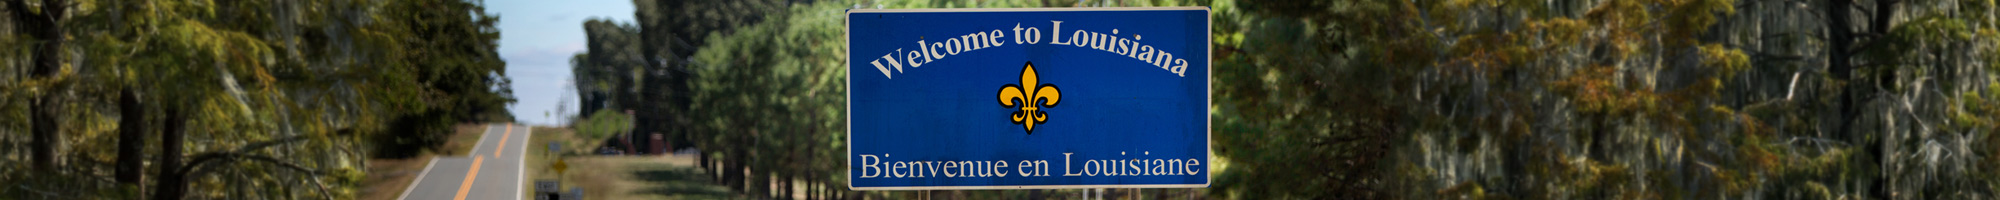 Sign welcoming visitors to Louisiana alongside a road going into the distance